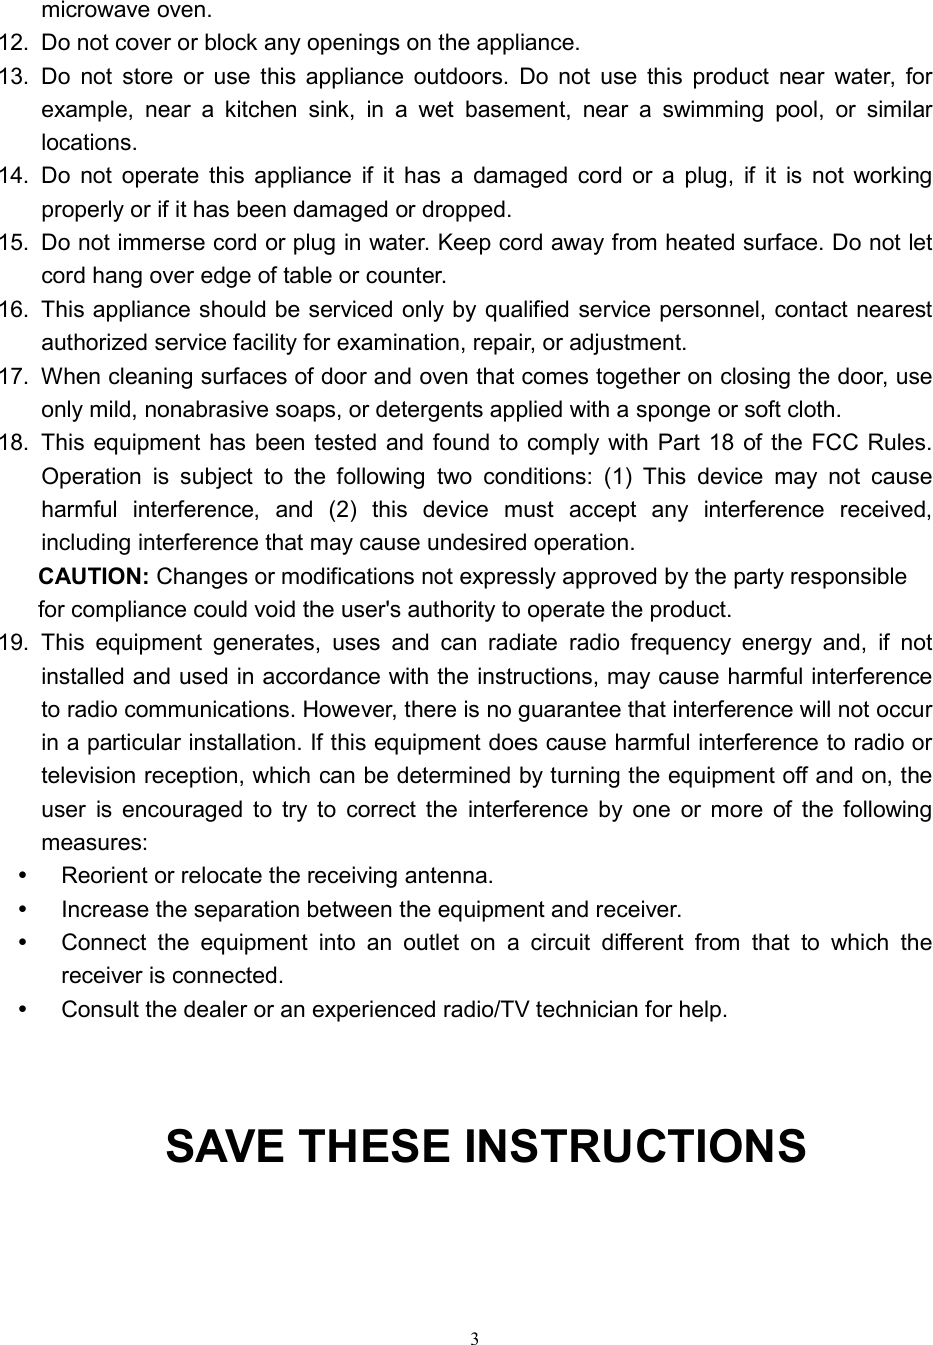 Page 3 of Galanz 7020007 Microwave Oven User Manual JS1M0609 23556 004